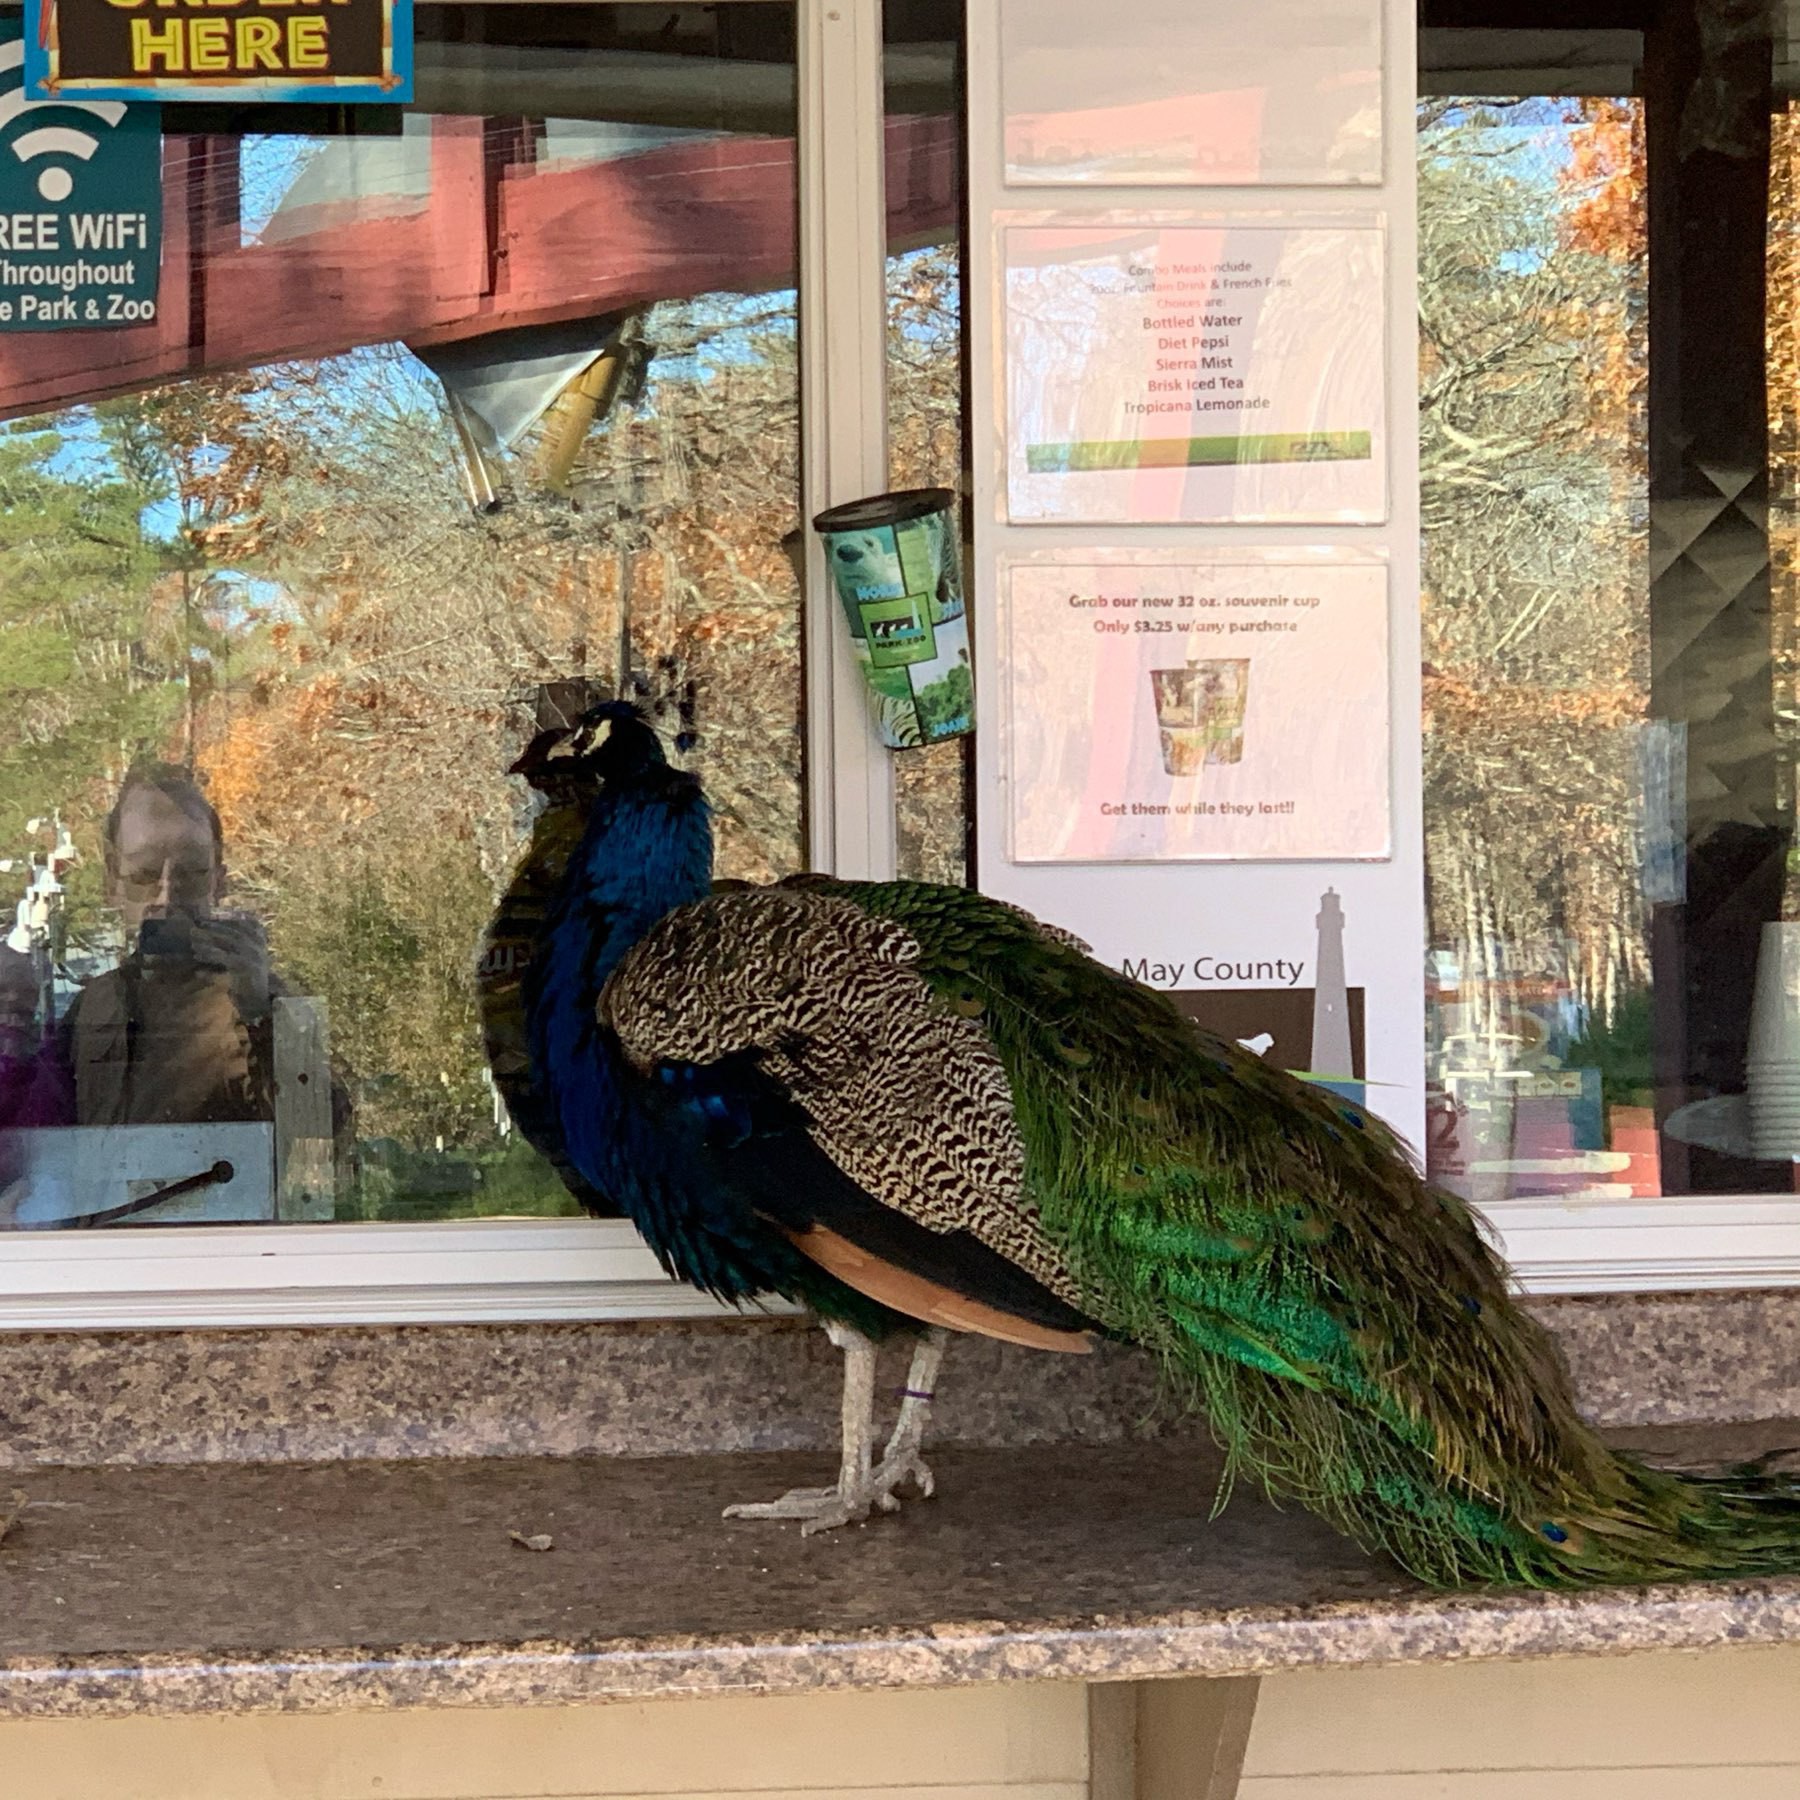 Peacock stands at ordering window of zoo concession stand